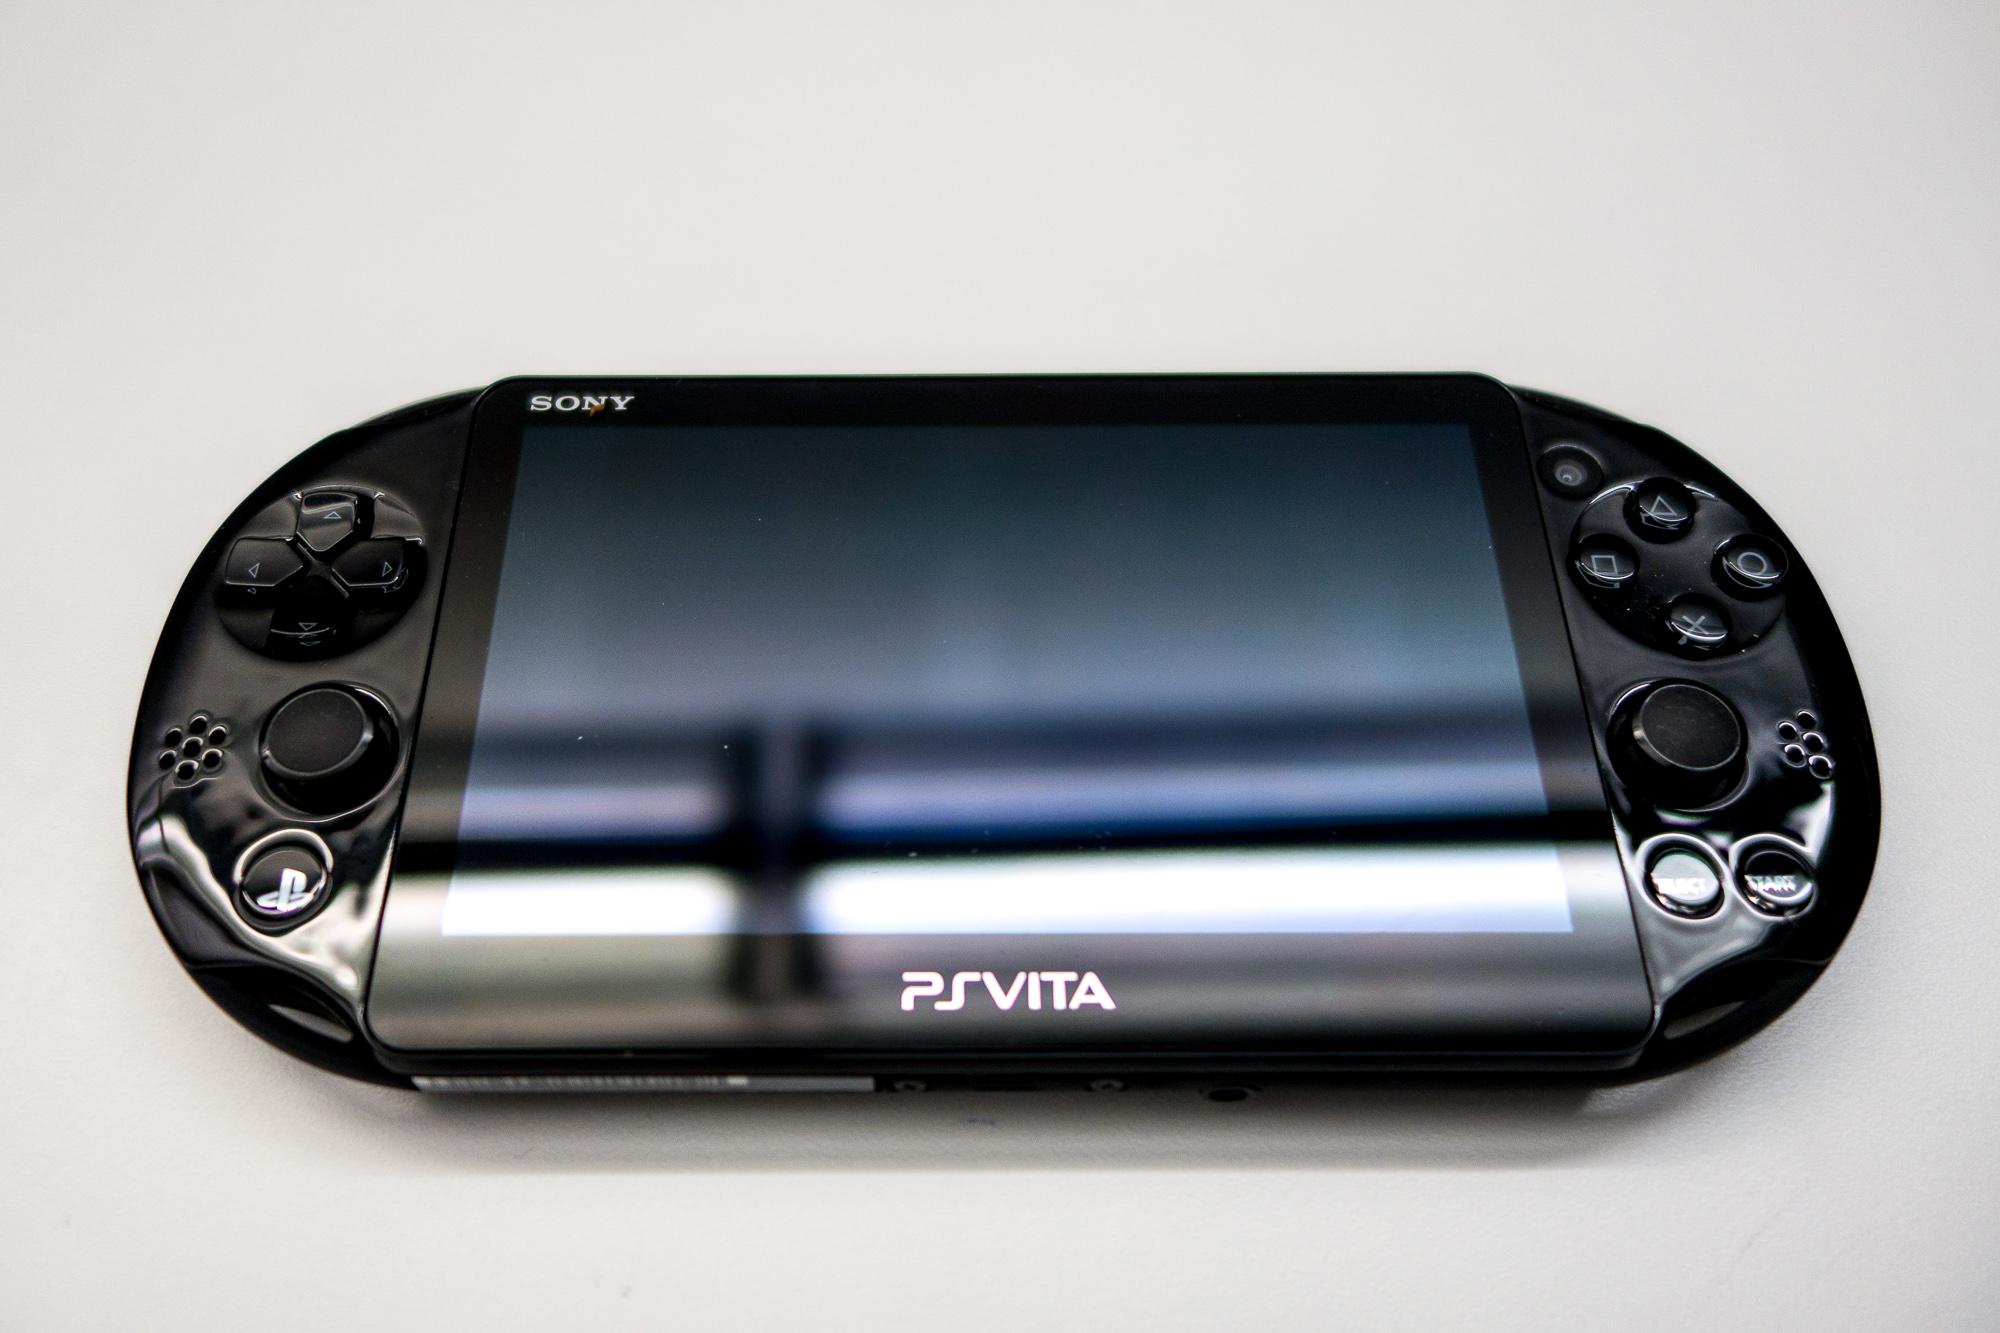 Slimmer $200 PlayStation Vita now available in North America 